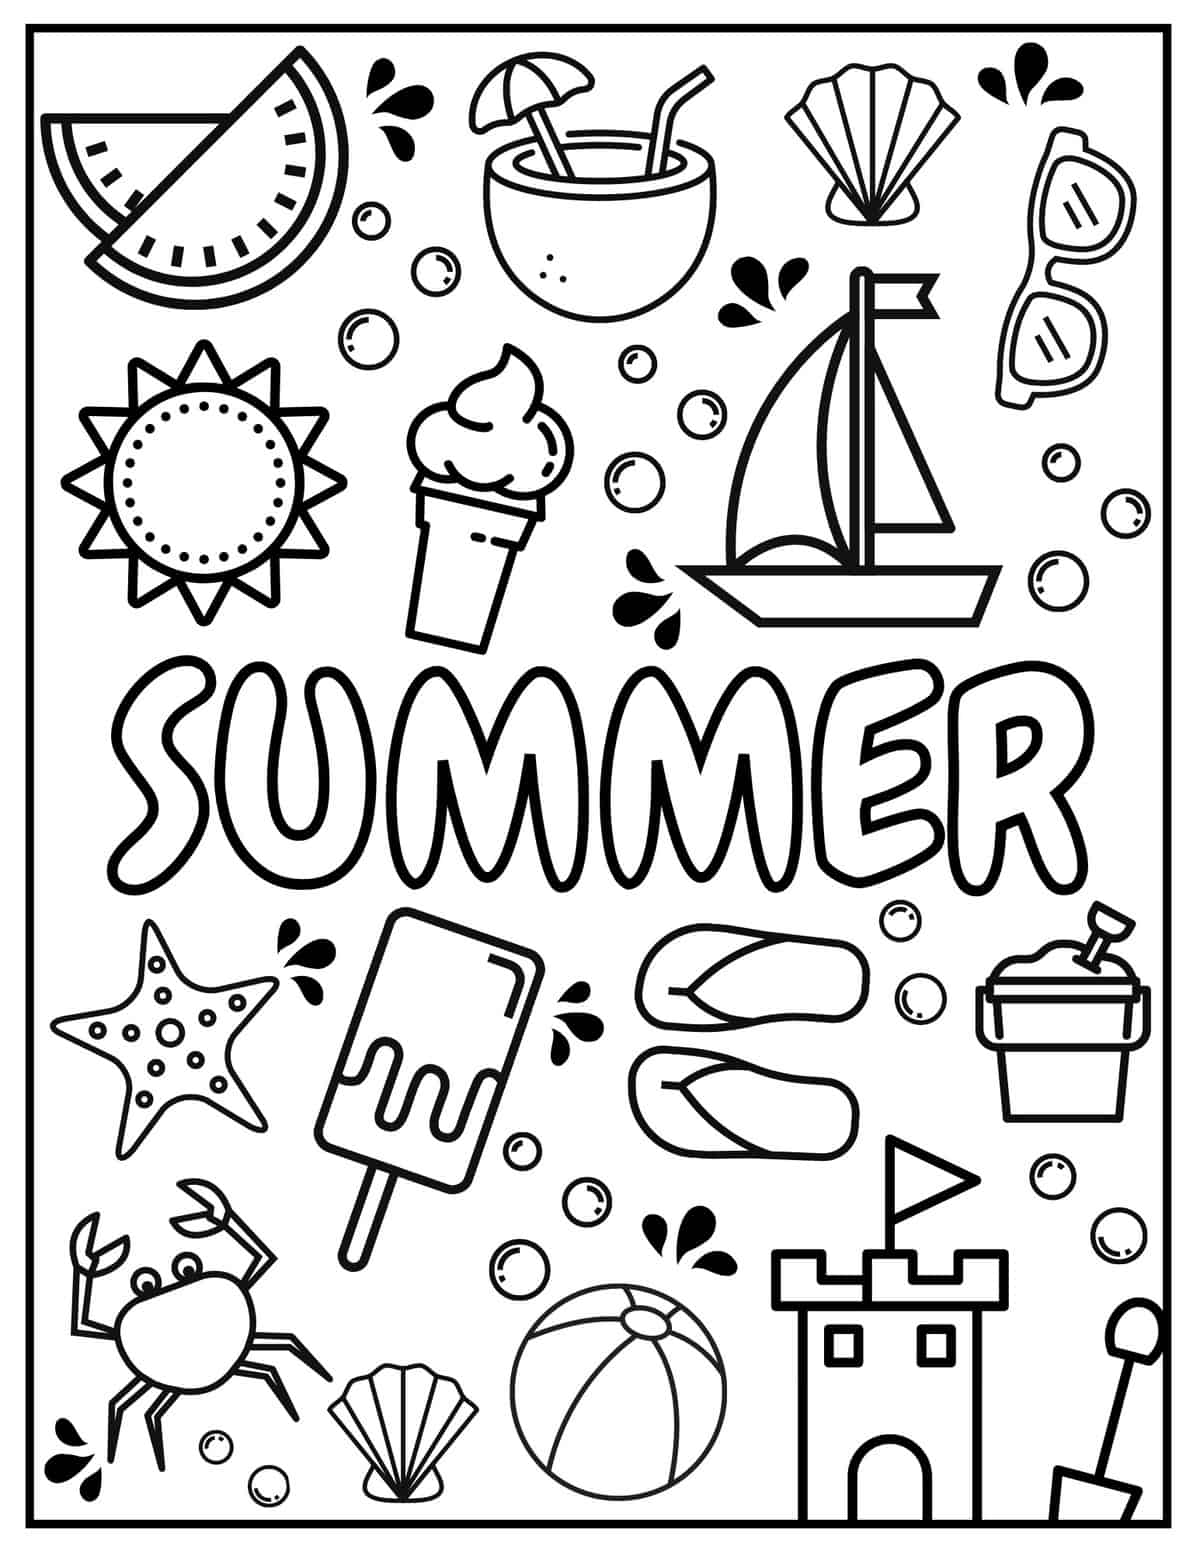 coloring-pages-summertime